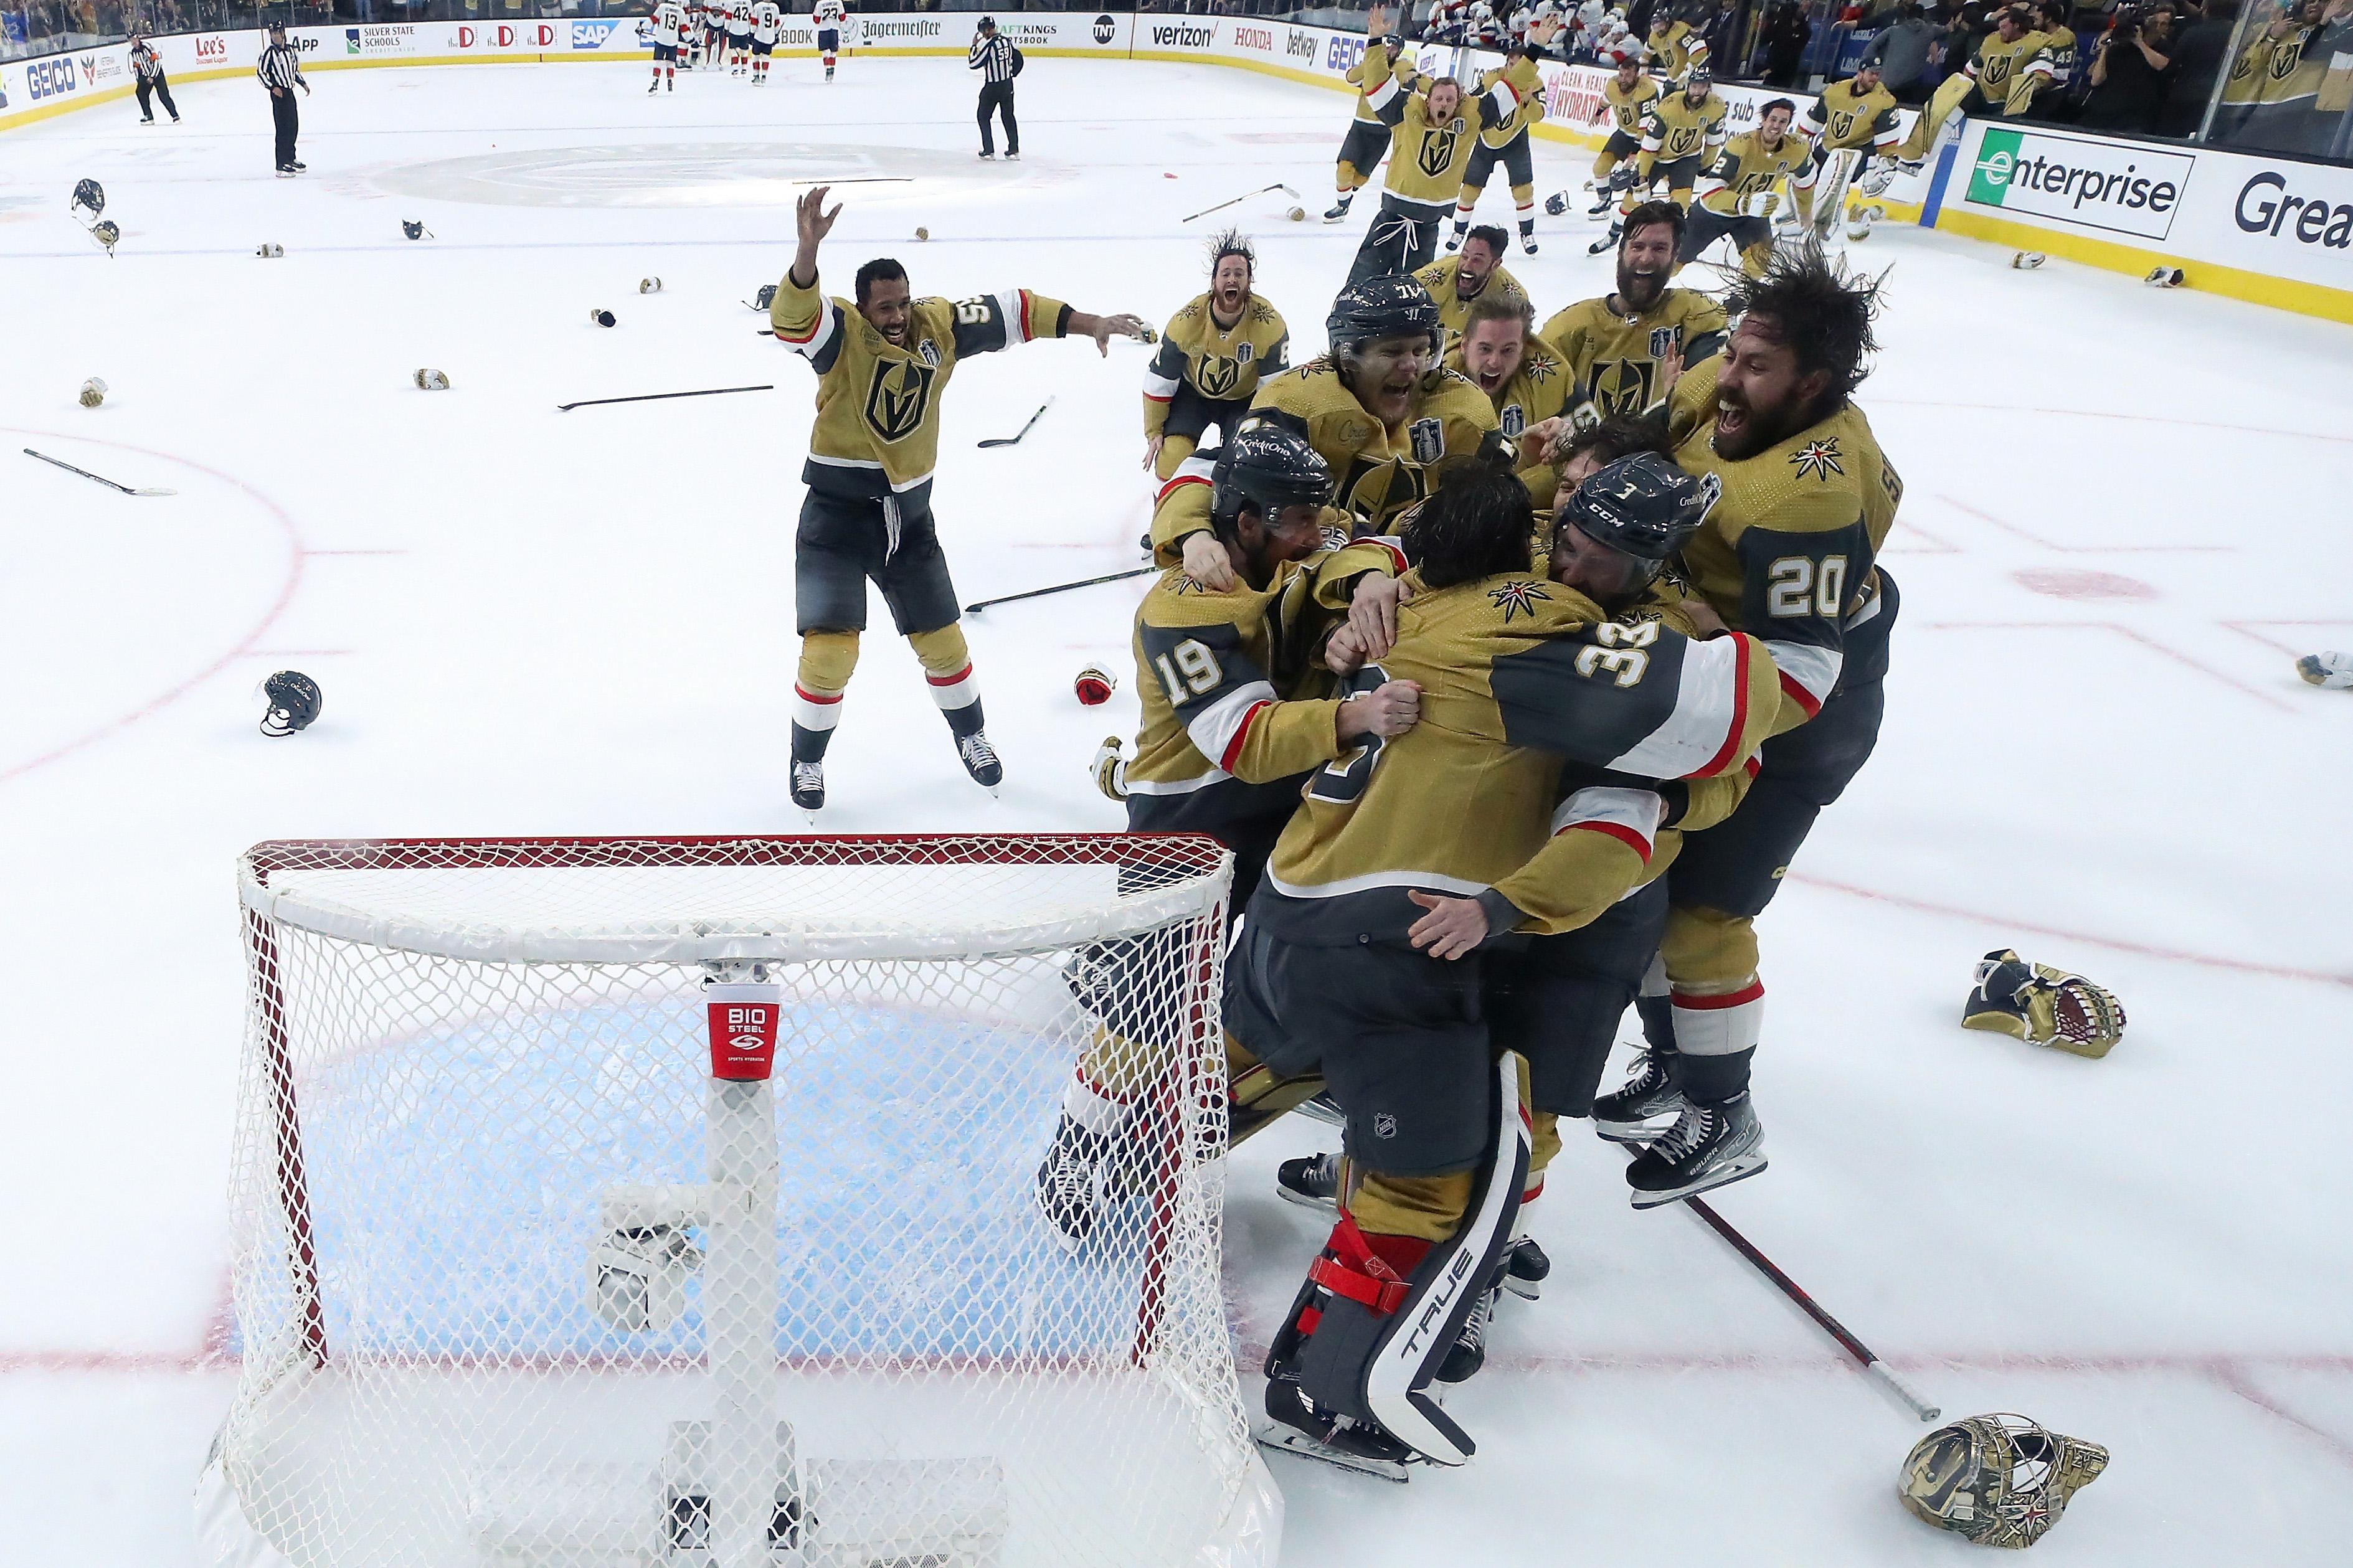 Hockey NHL Stanley Cup champion the Vegas Golden Knights are an expansion team done right.